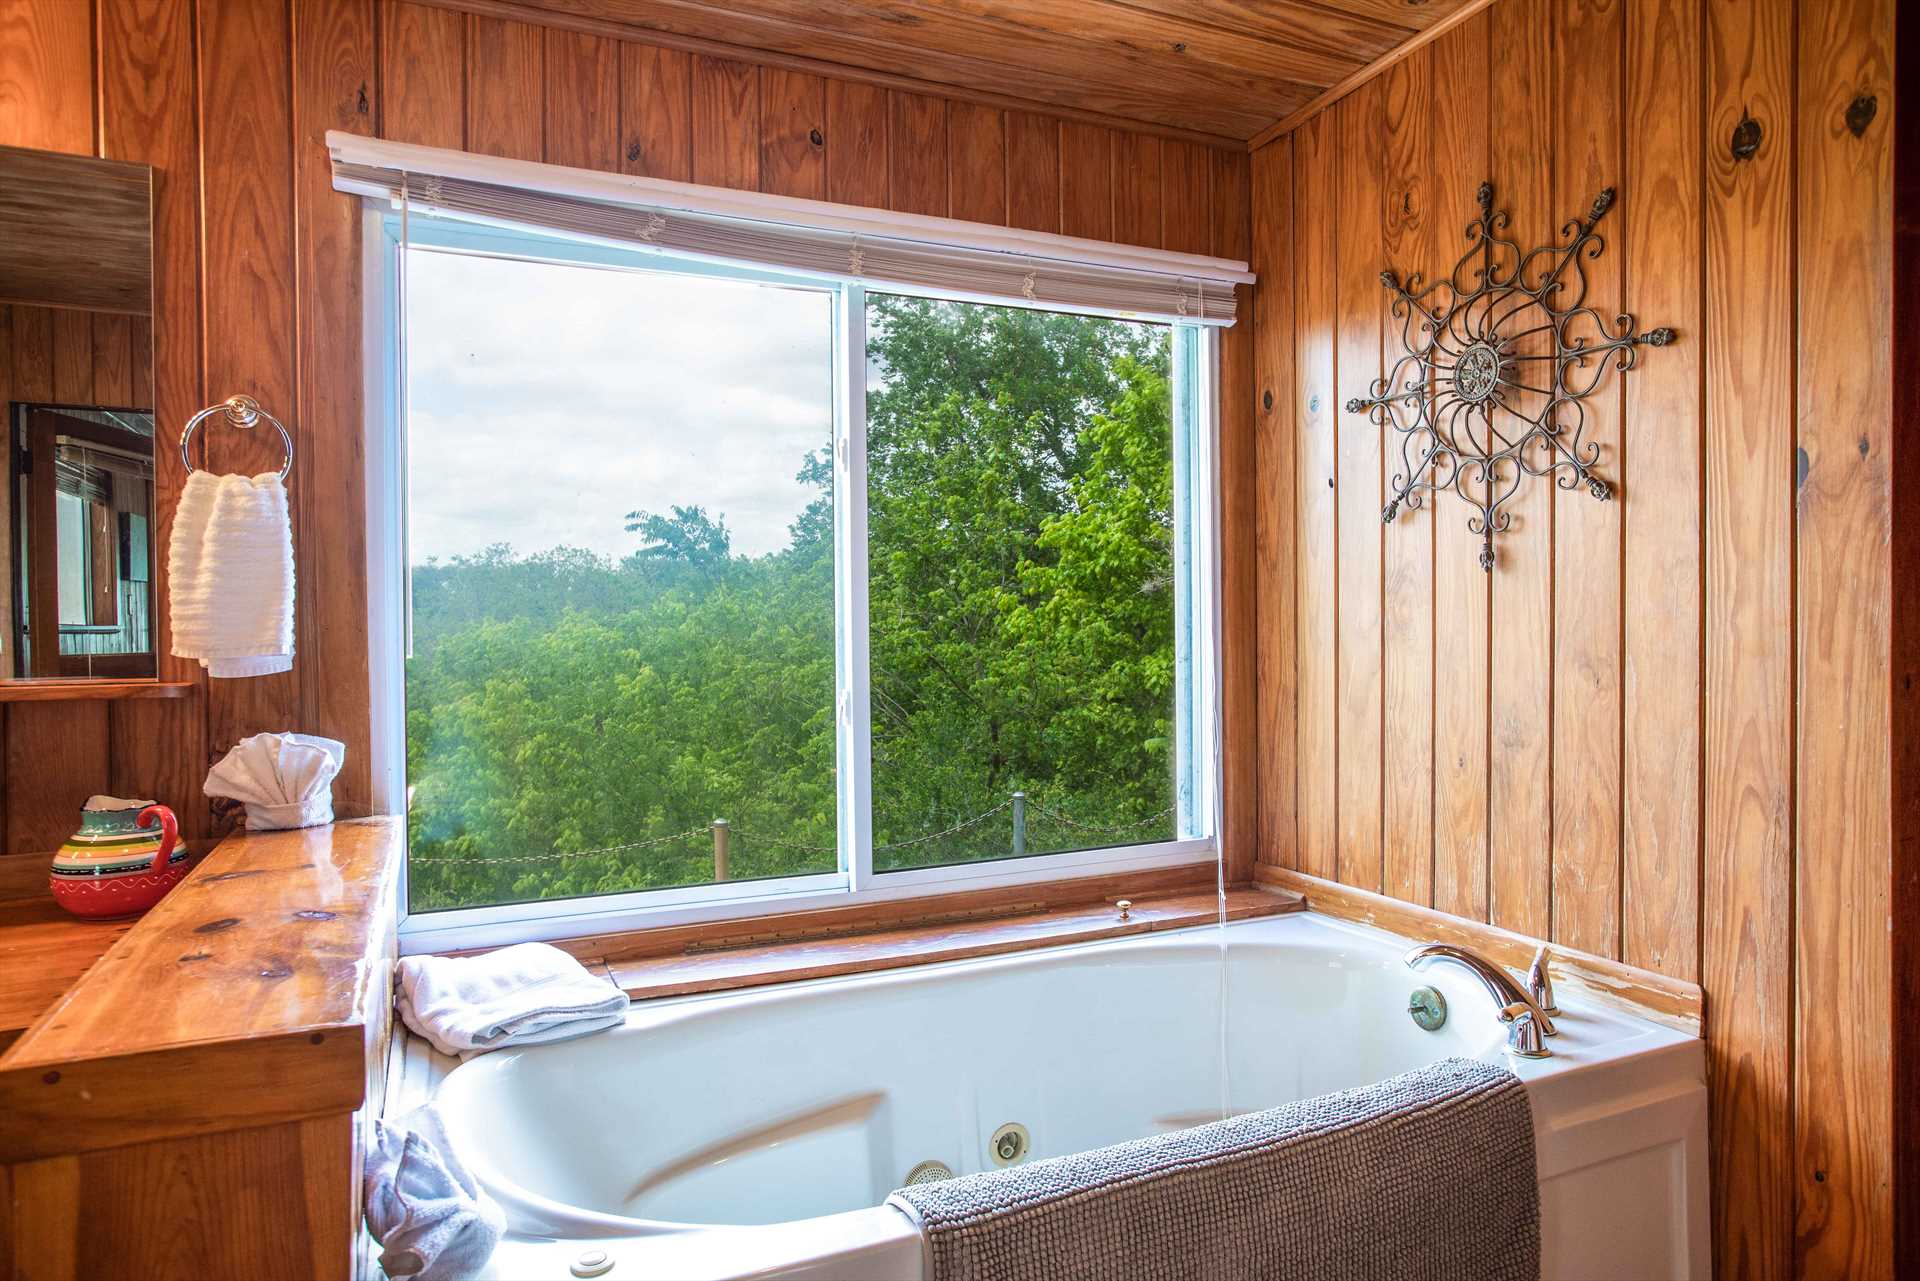                                                 There's a shower in the master bath, but you may prefer a nice sit-down in the Jacuzzi tub!